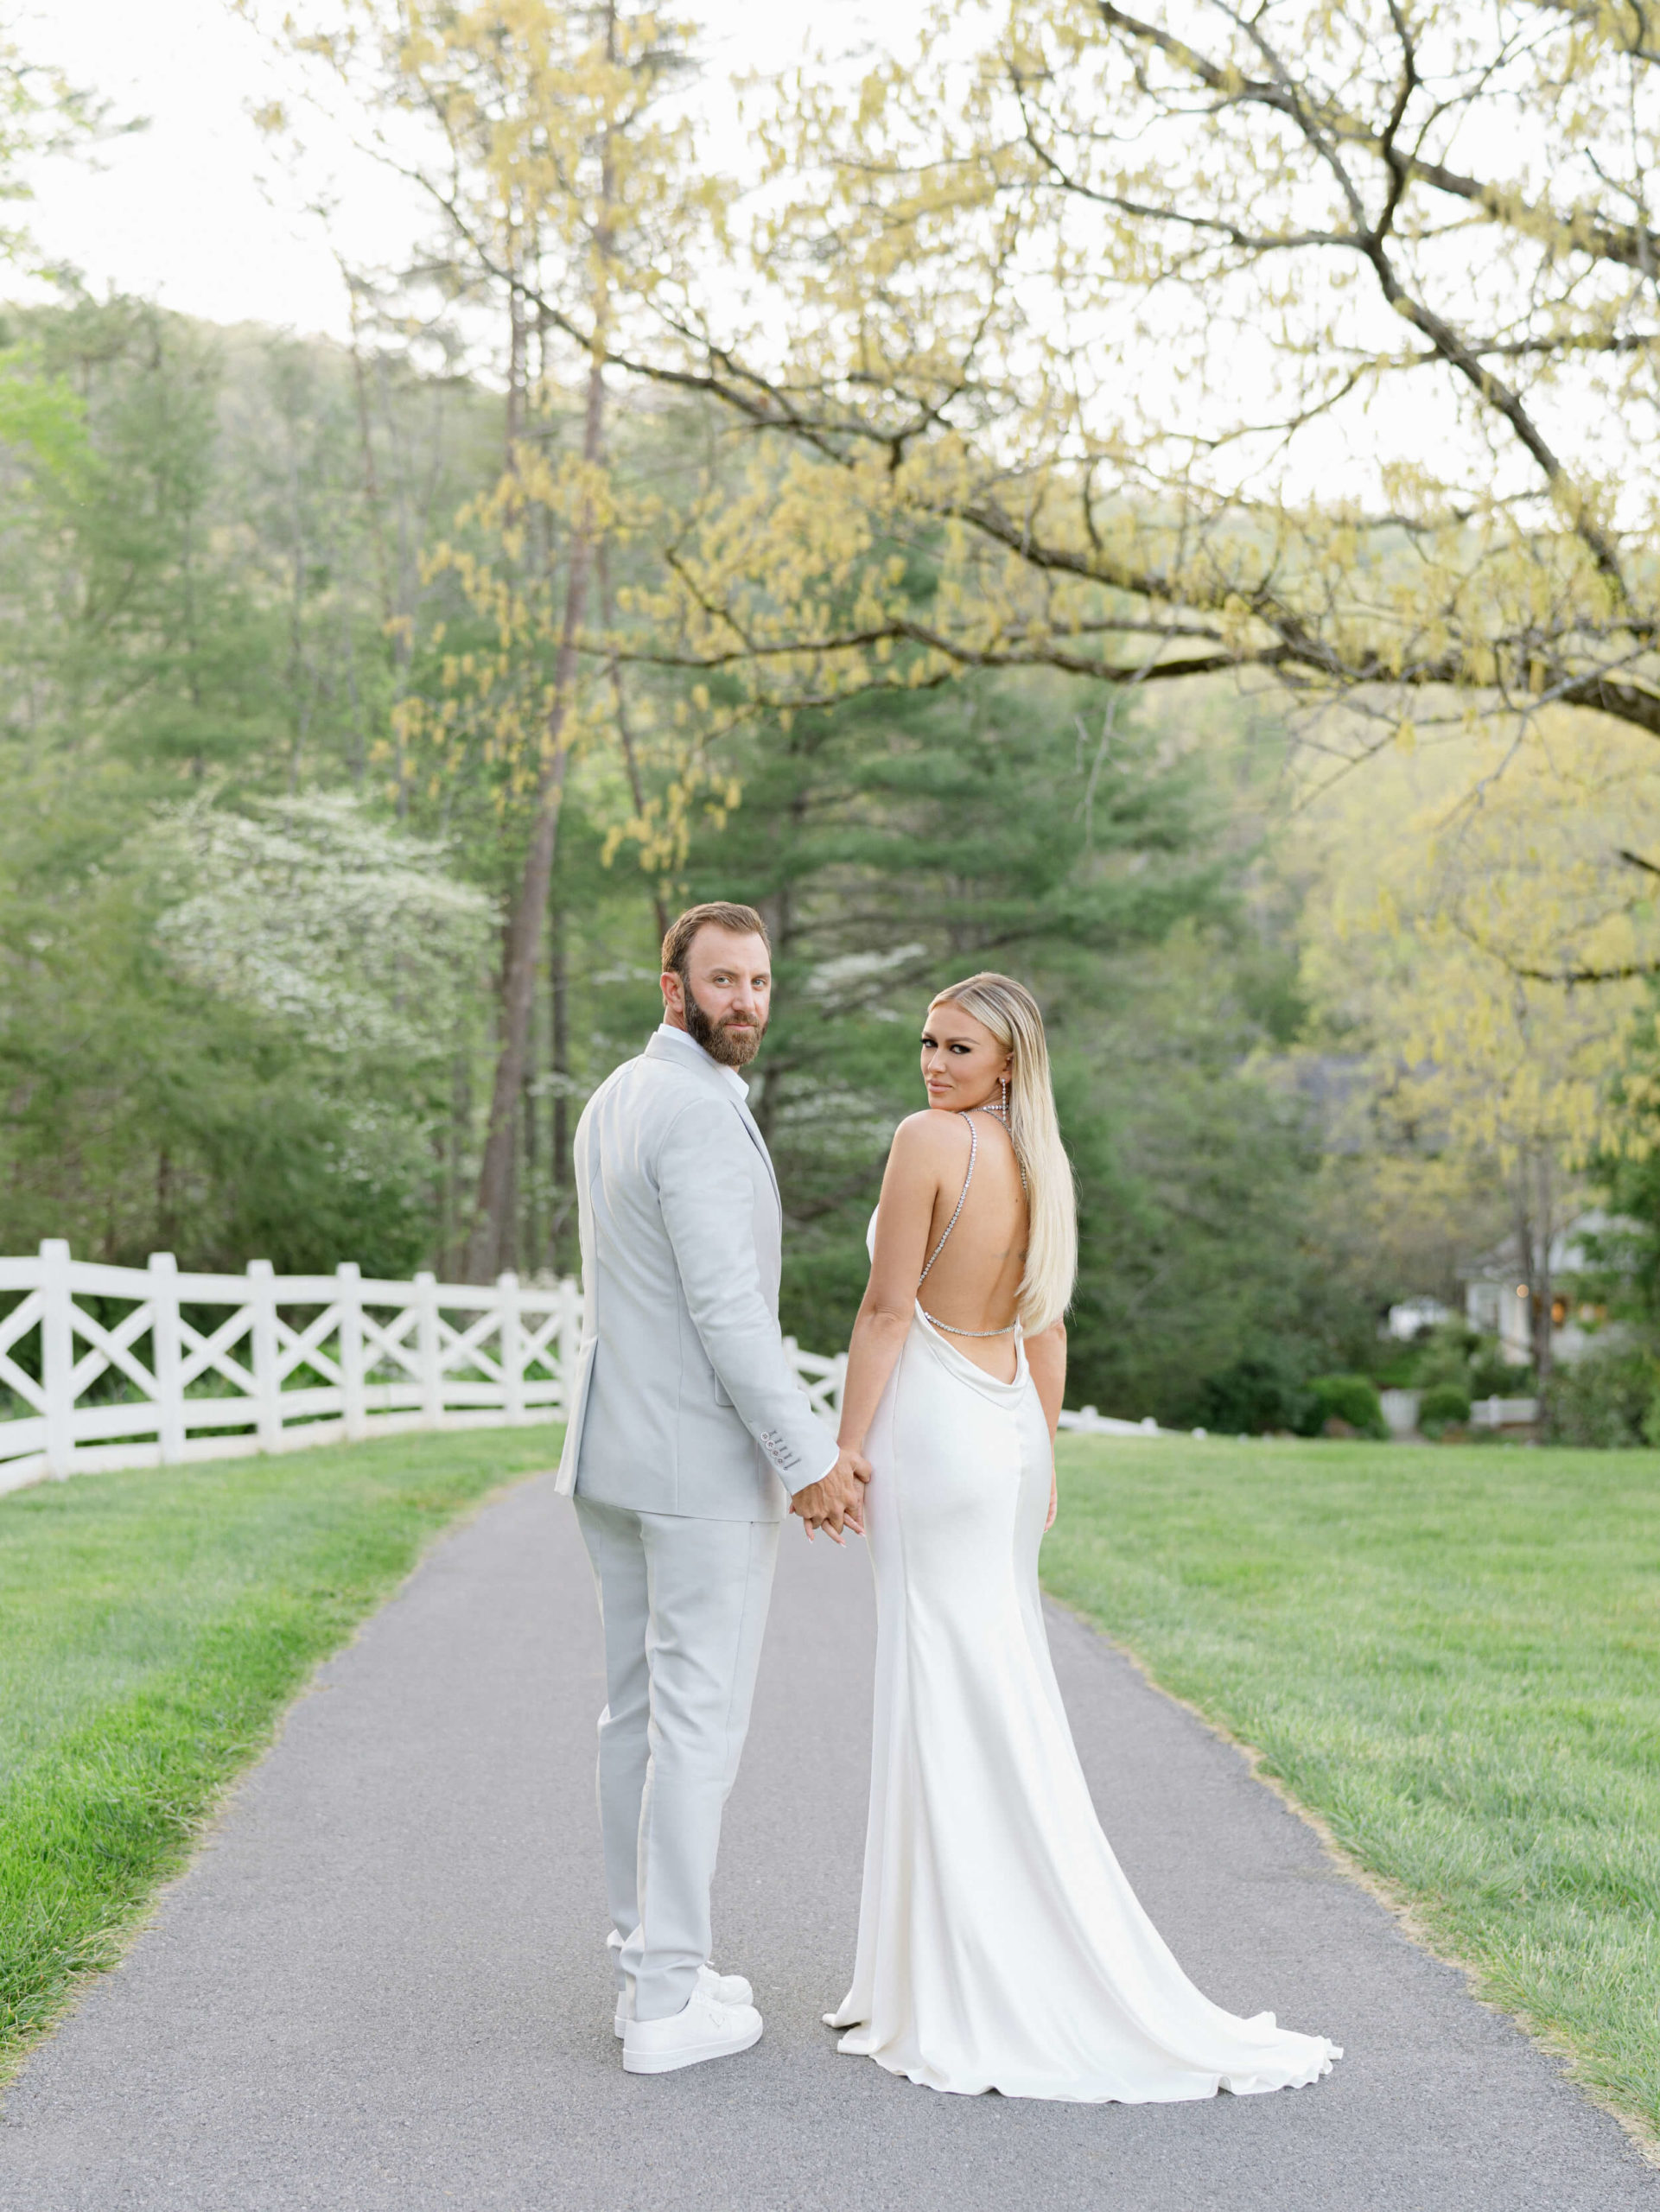 Paulina Gretzky and Dustin Johnson’s wedding at the luxe Blackberry Farm in Tennessee